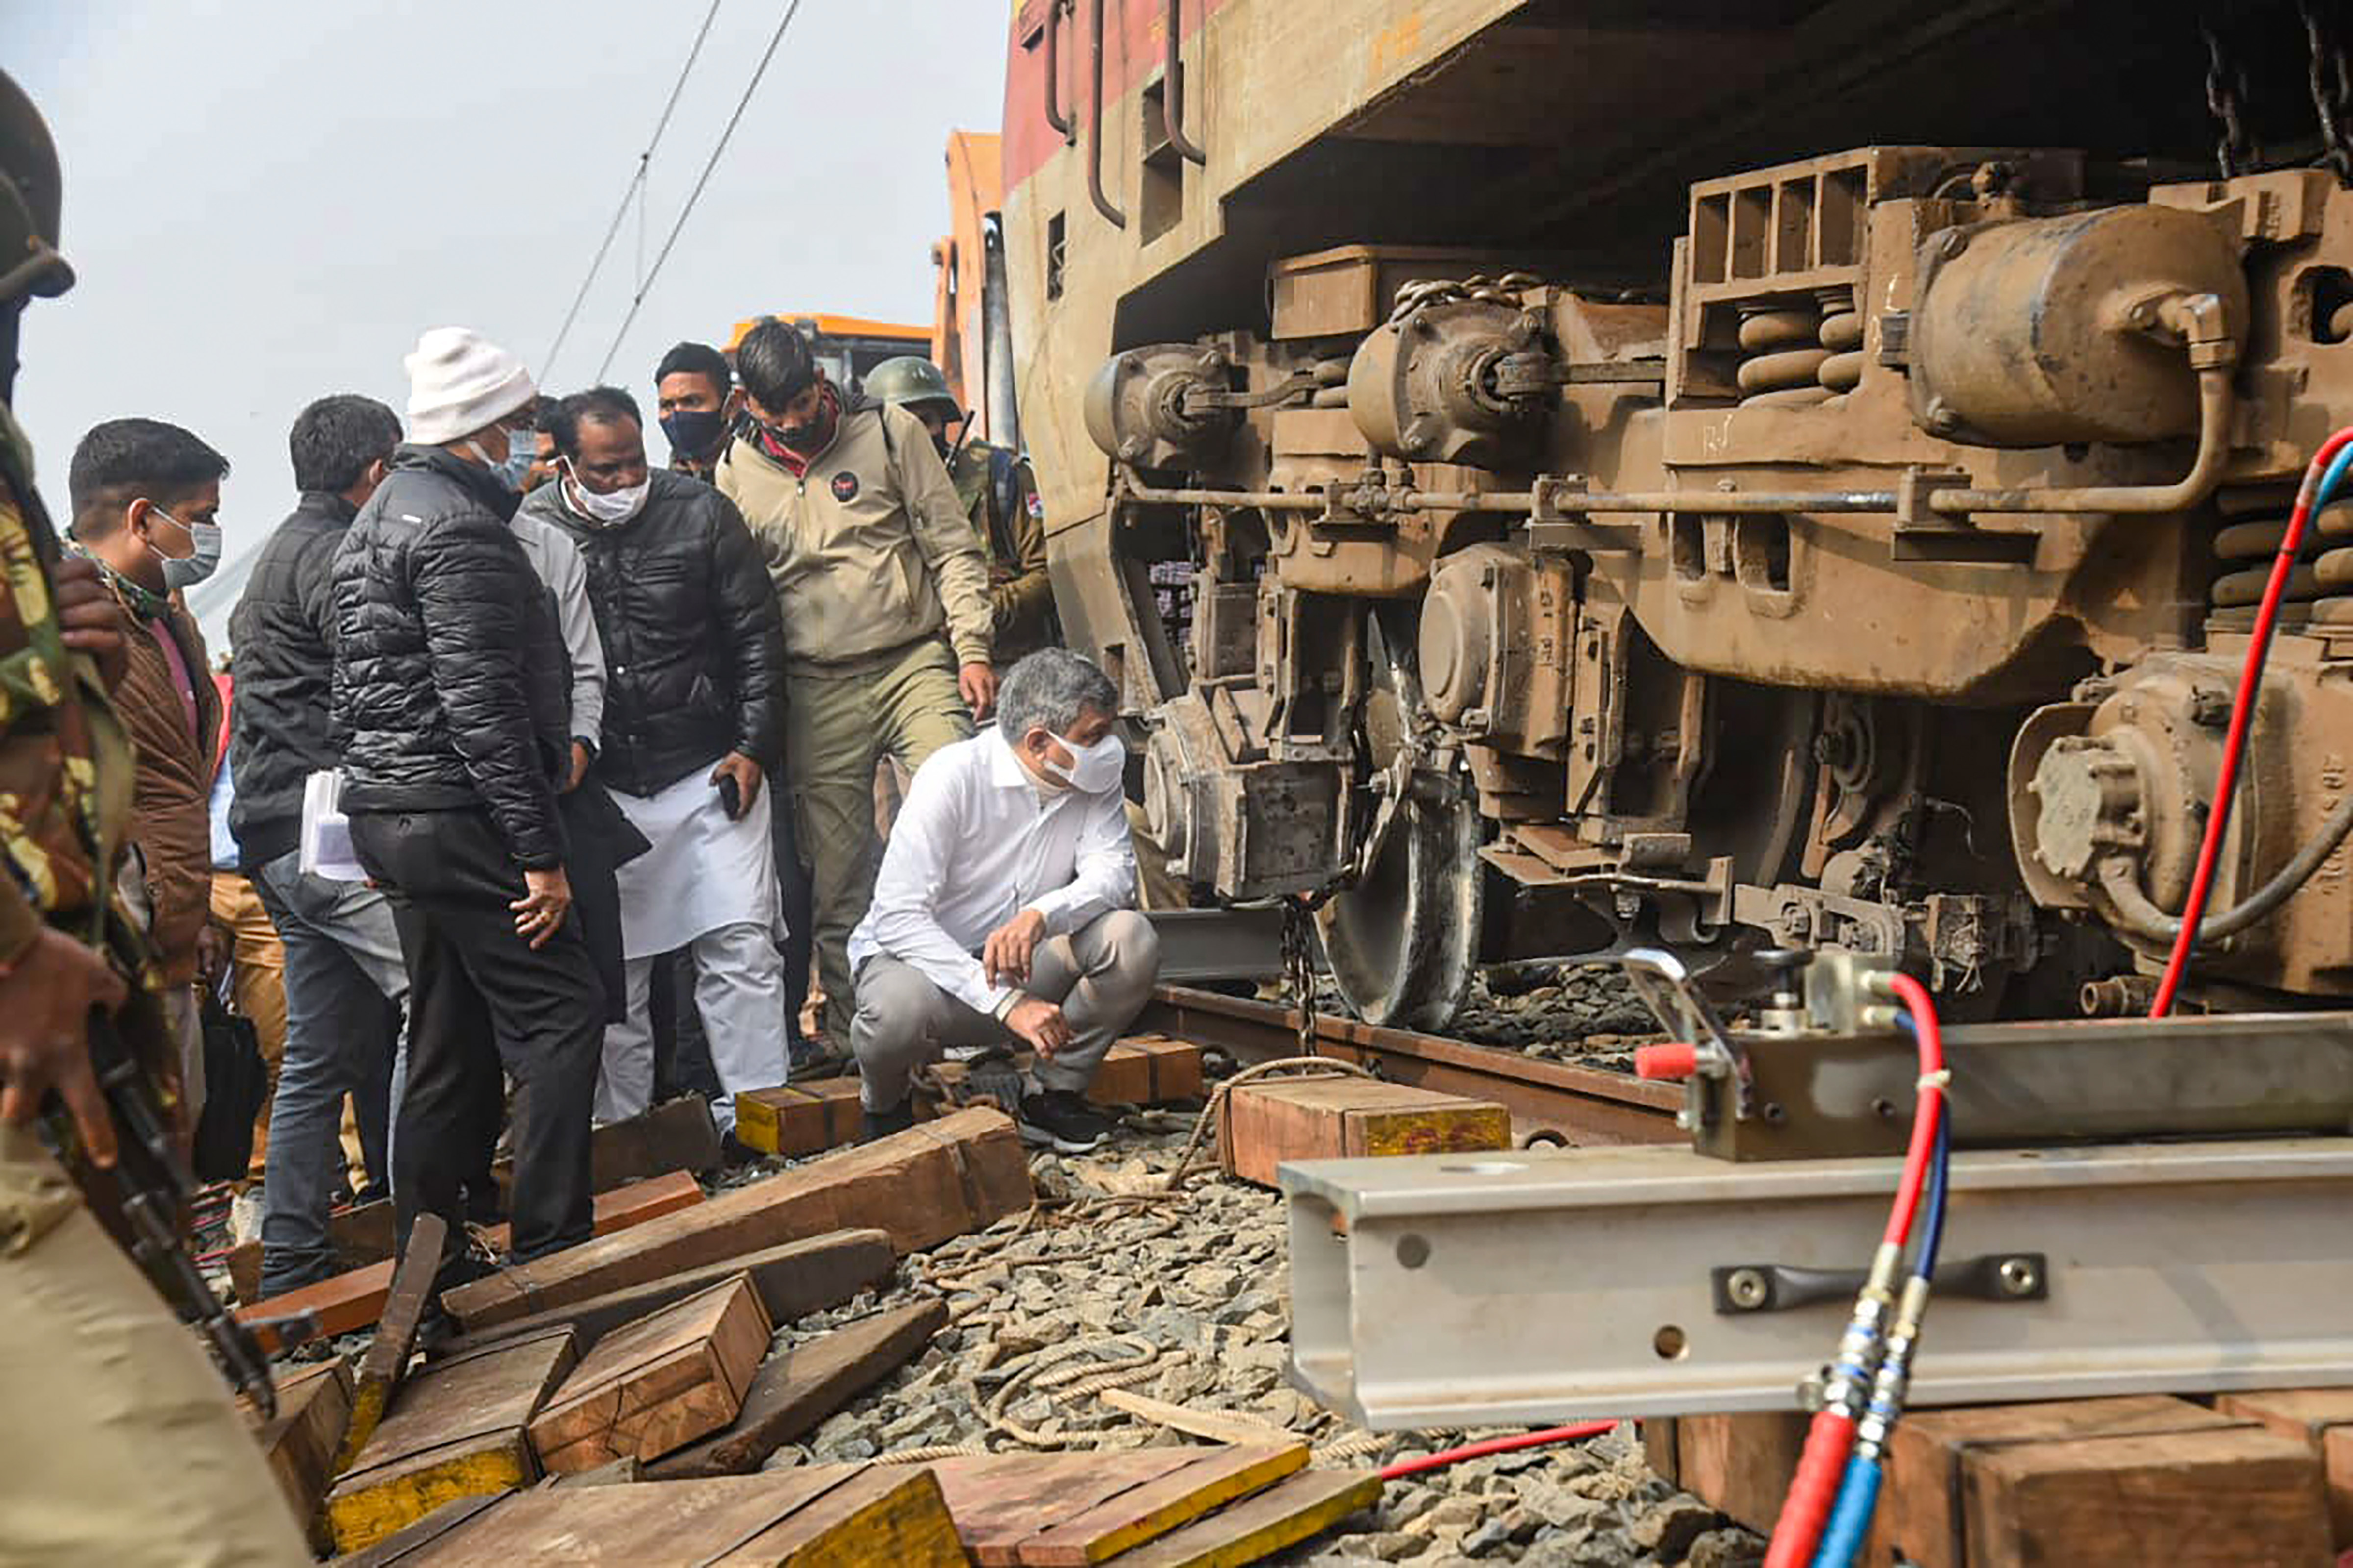 9 Killed, 37 Injured In Bengal Train Accident, Railway Minister At Site